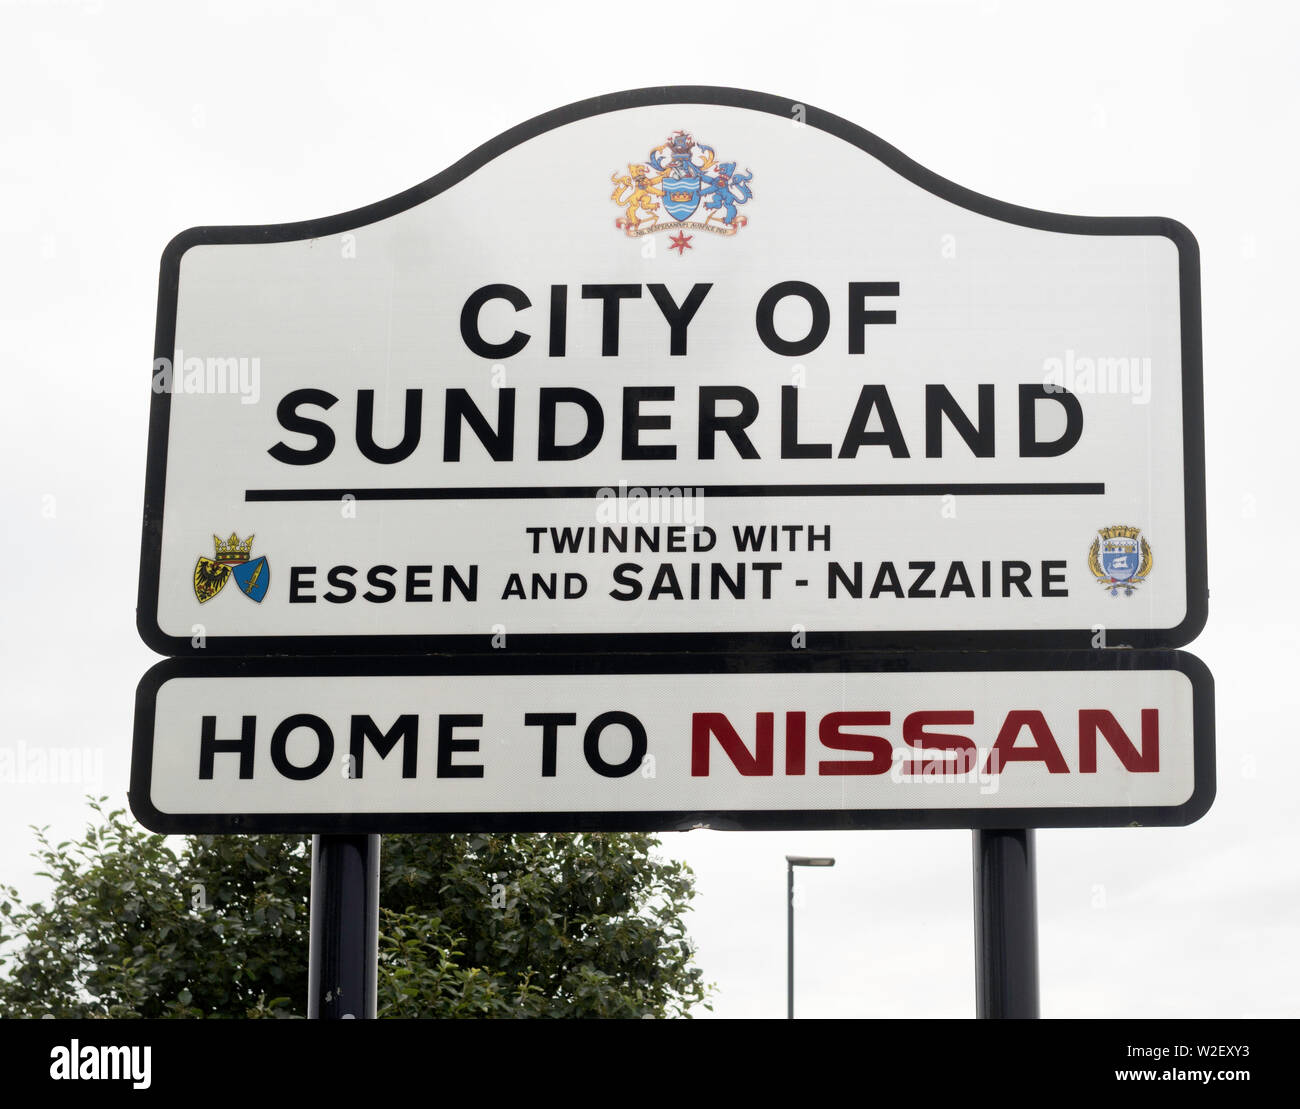 Road or town or city sign, City of Sunderland, Home to Nissan, Washington, north east England, UK Stock Photo